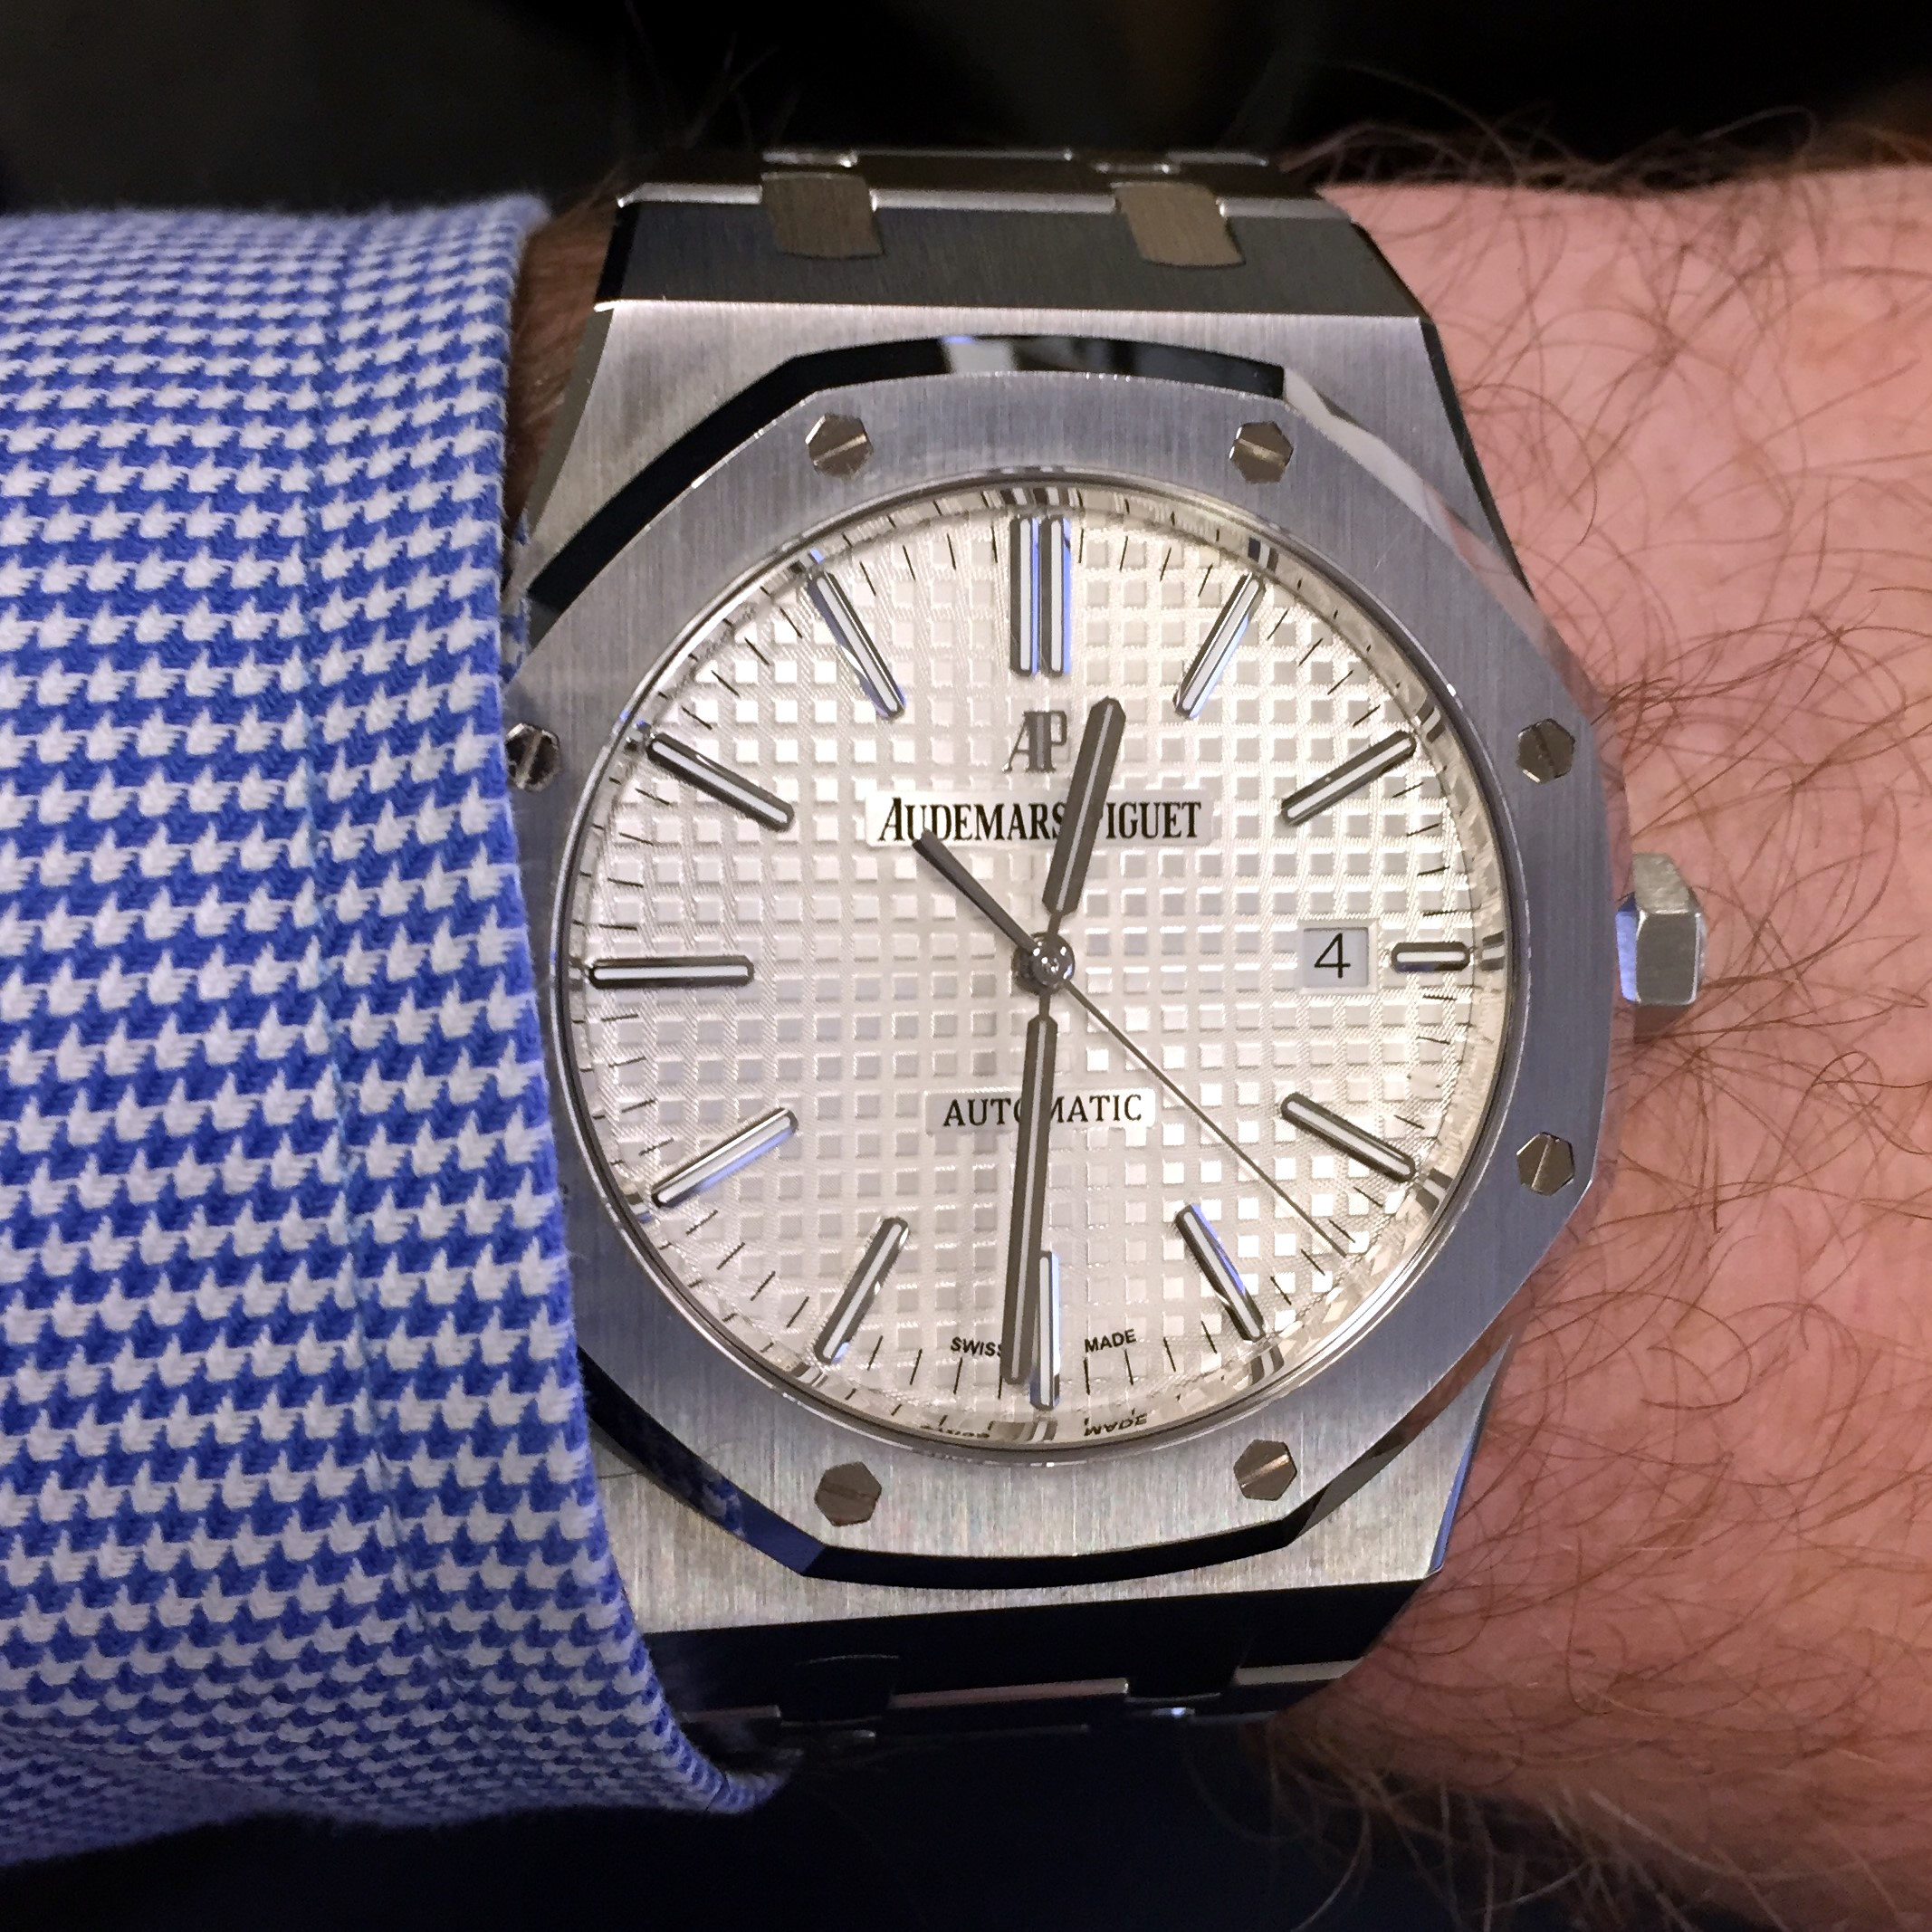 The Audemars Piguet Royal Oak watch design was inspired by a porthole